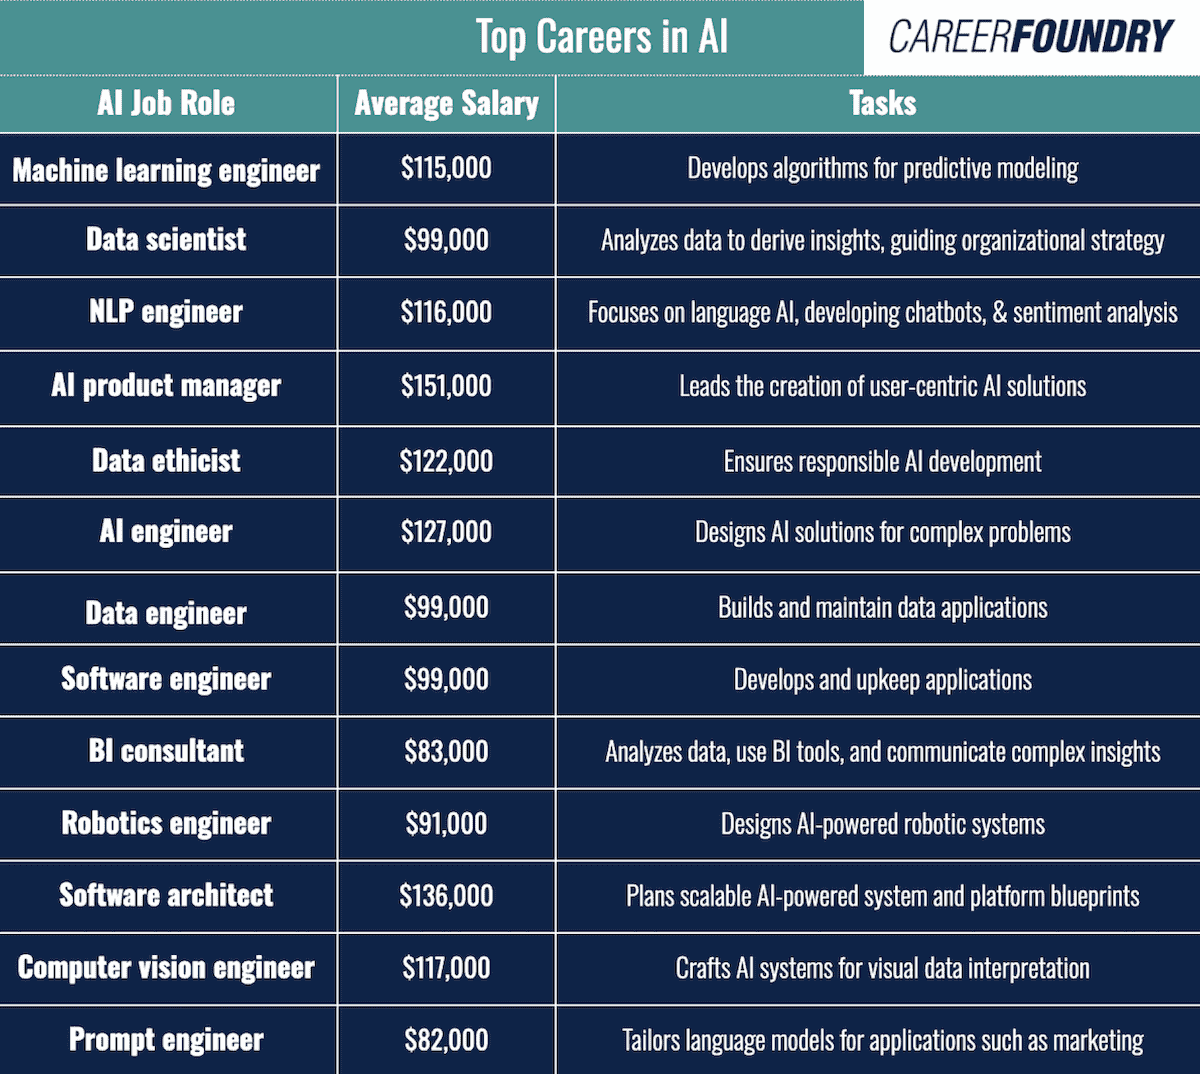 A table comparing various different careers in AI, their tasks, and the average salaries for them.